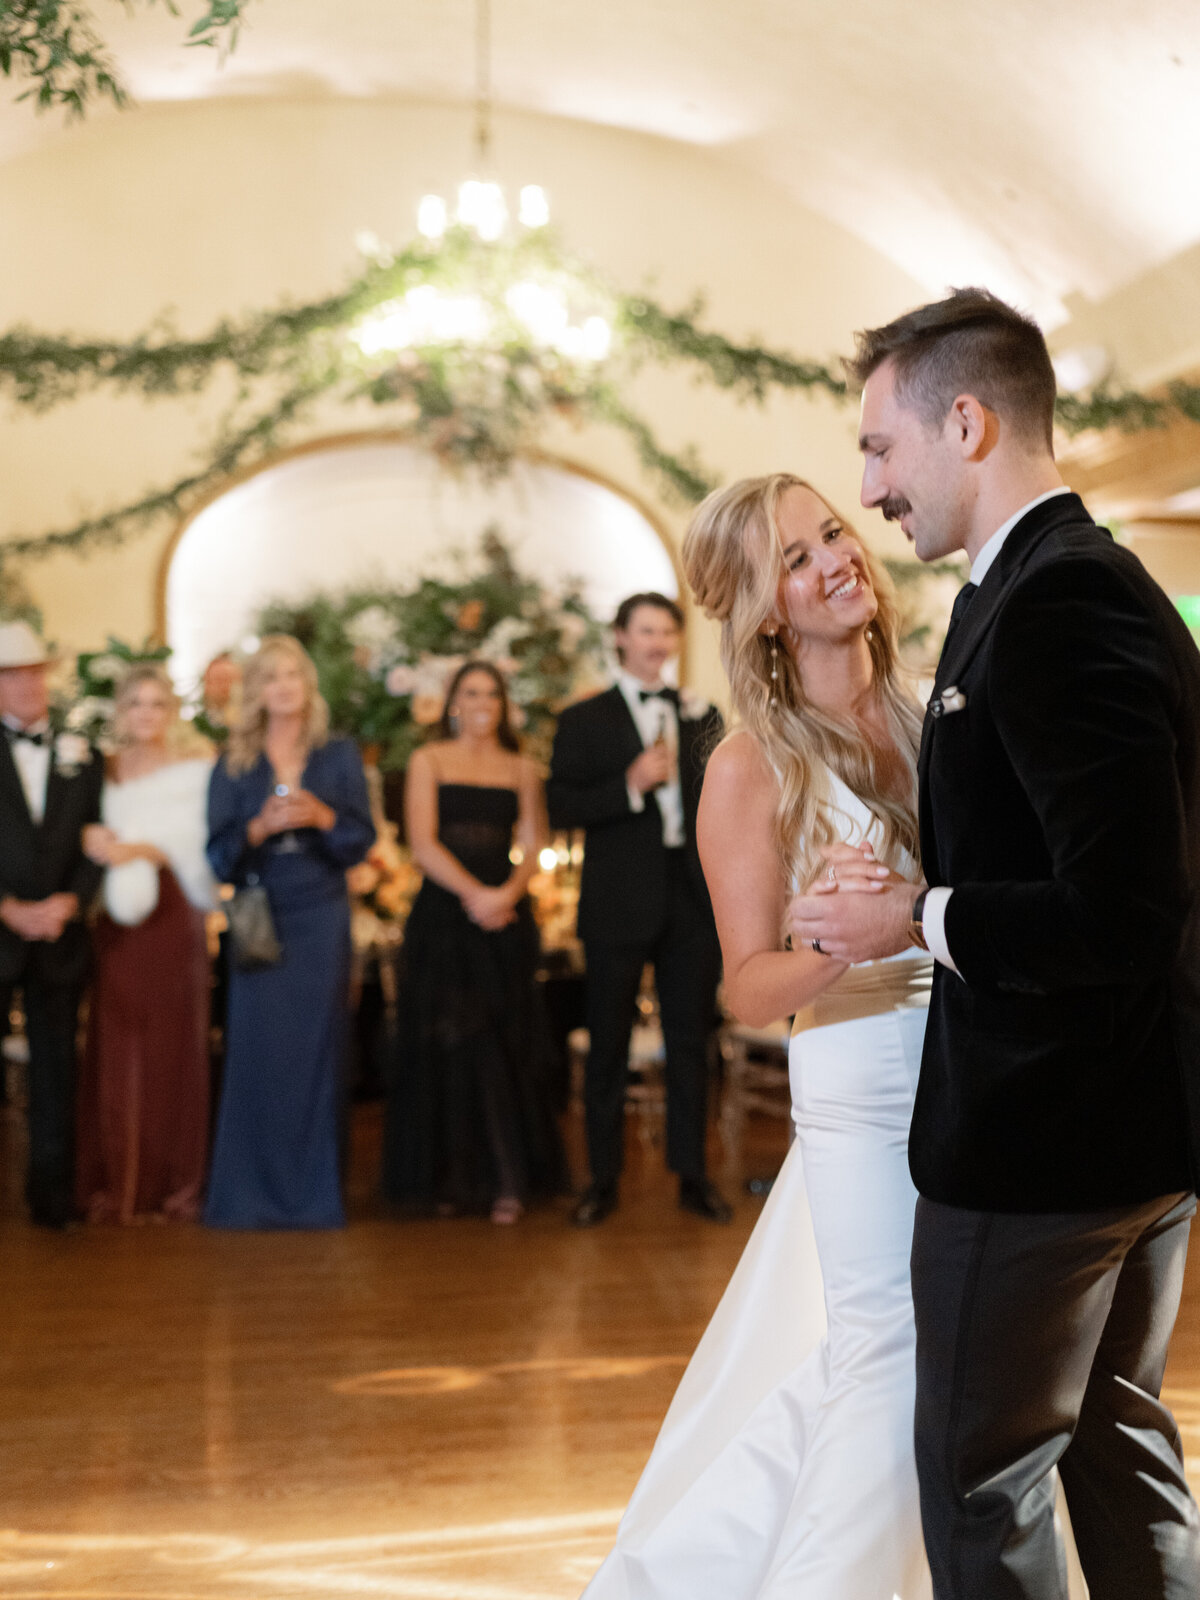 Whitney Bowman Events Knoxville Tennessee Wedding Planner Planning Destination Southern Weddings Florida 30A Alabama Luxury Event Destination Weddings MaggieSpencerWedding_Knoxville_2022_@benfinch_FinchPhoto-287